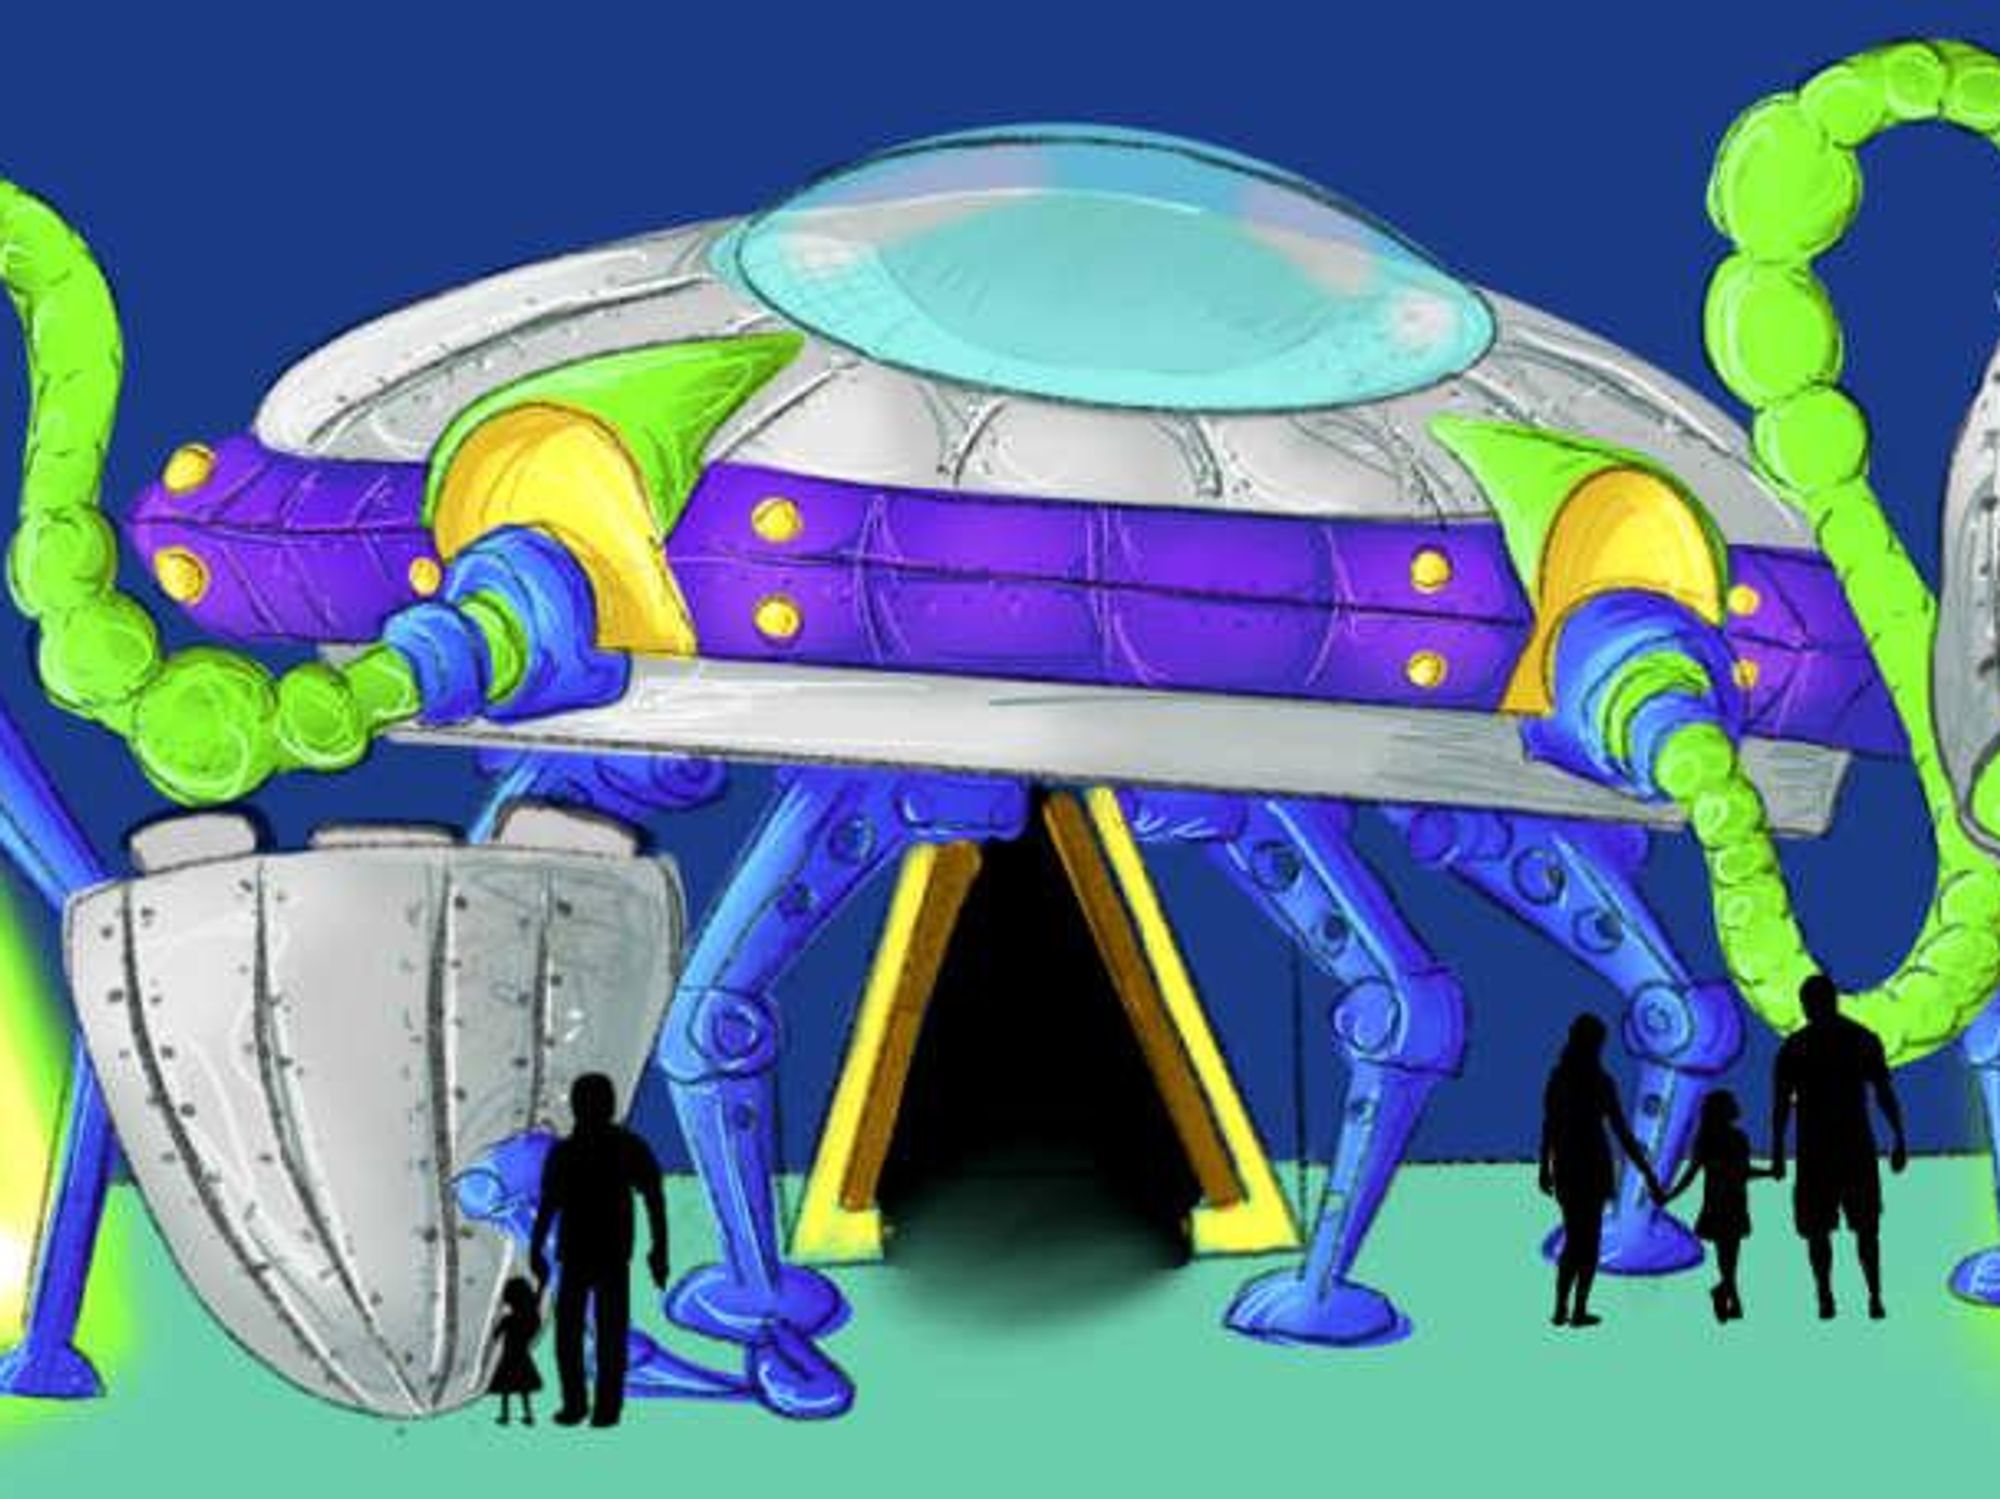 Spacey new 'intergalactic playground' museum touches down in Texas -  CultureMap Dallas